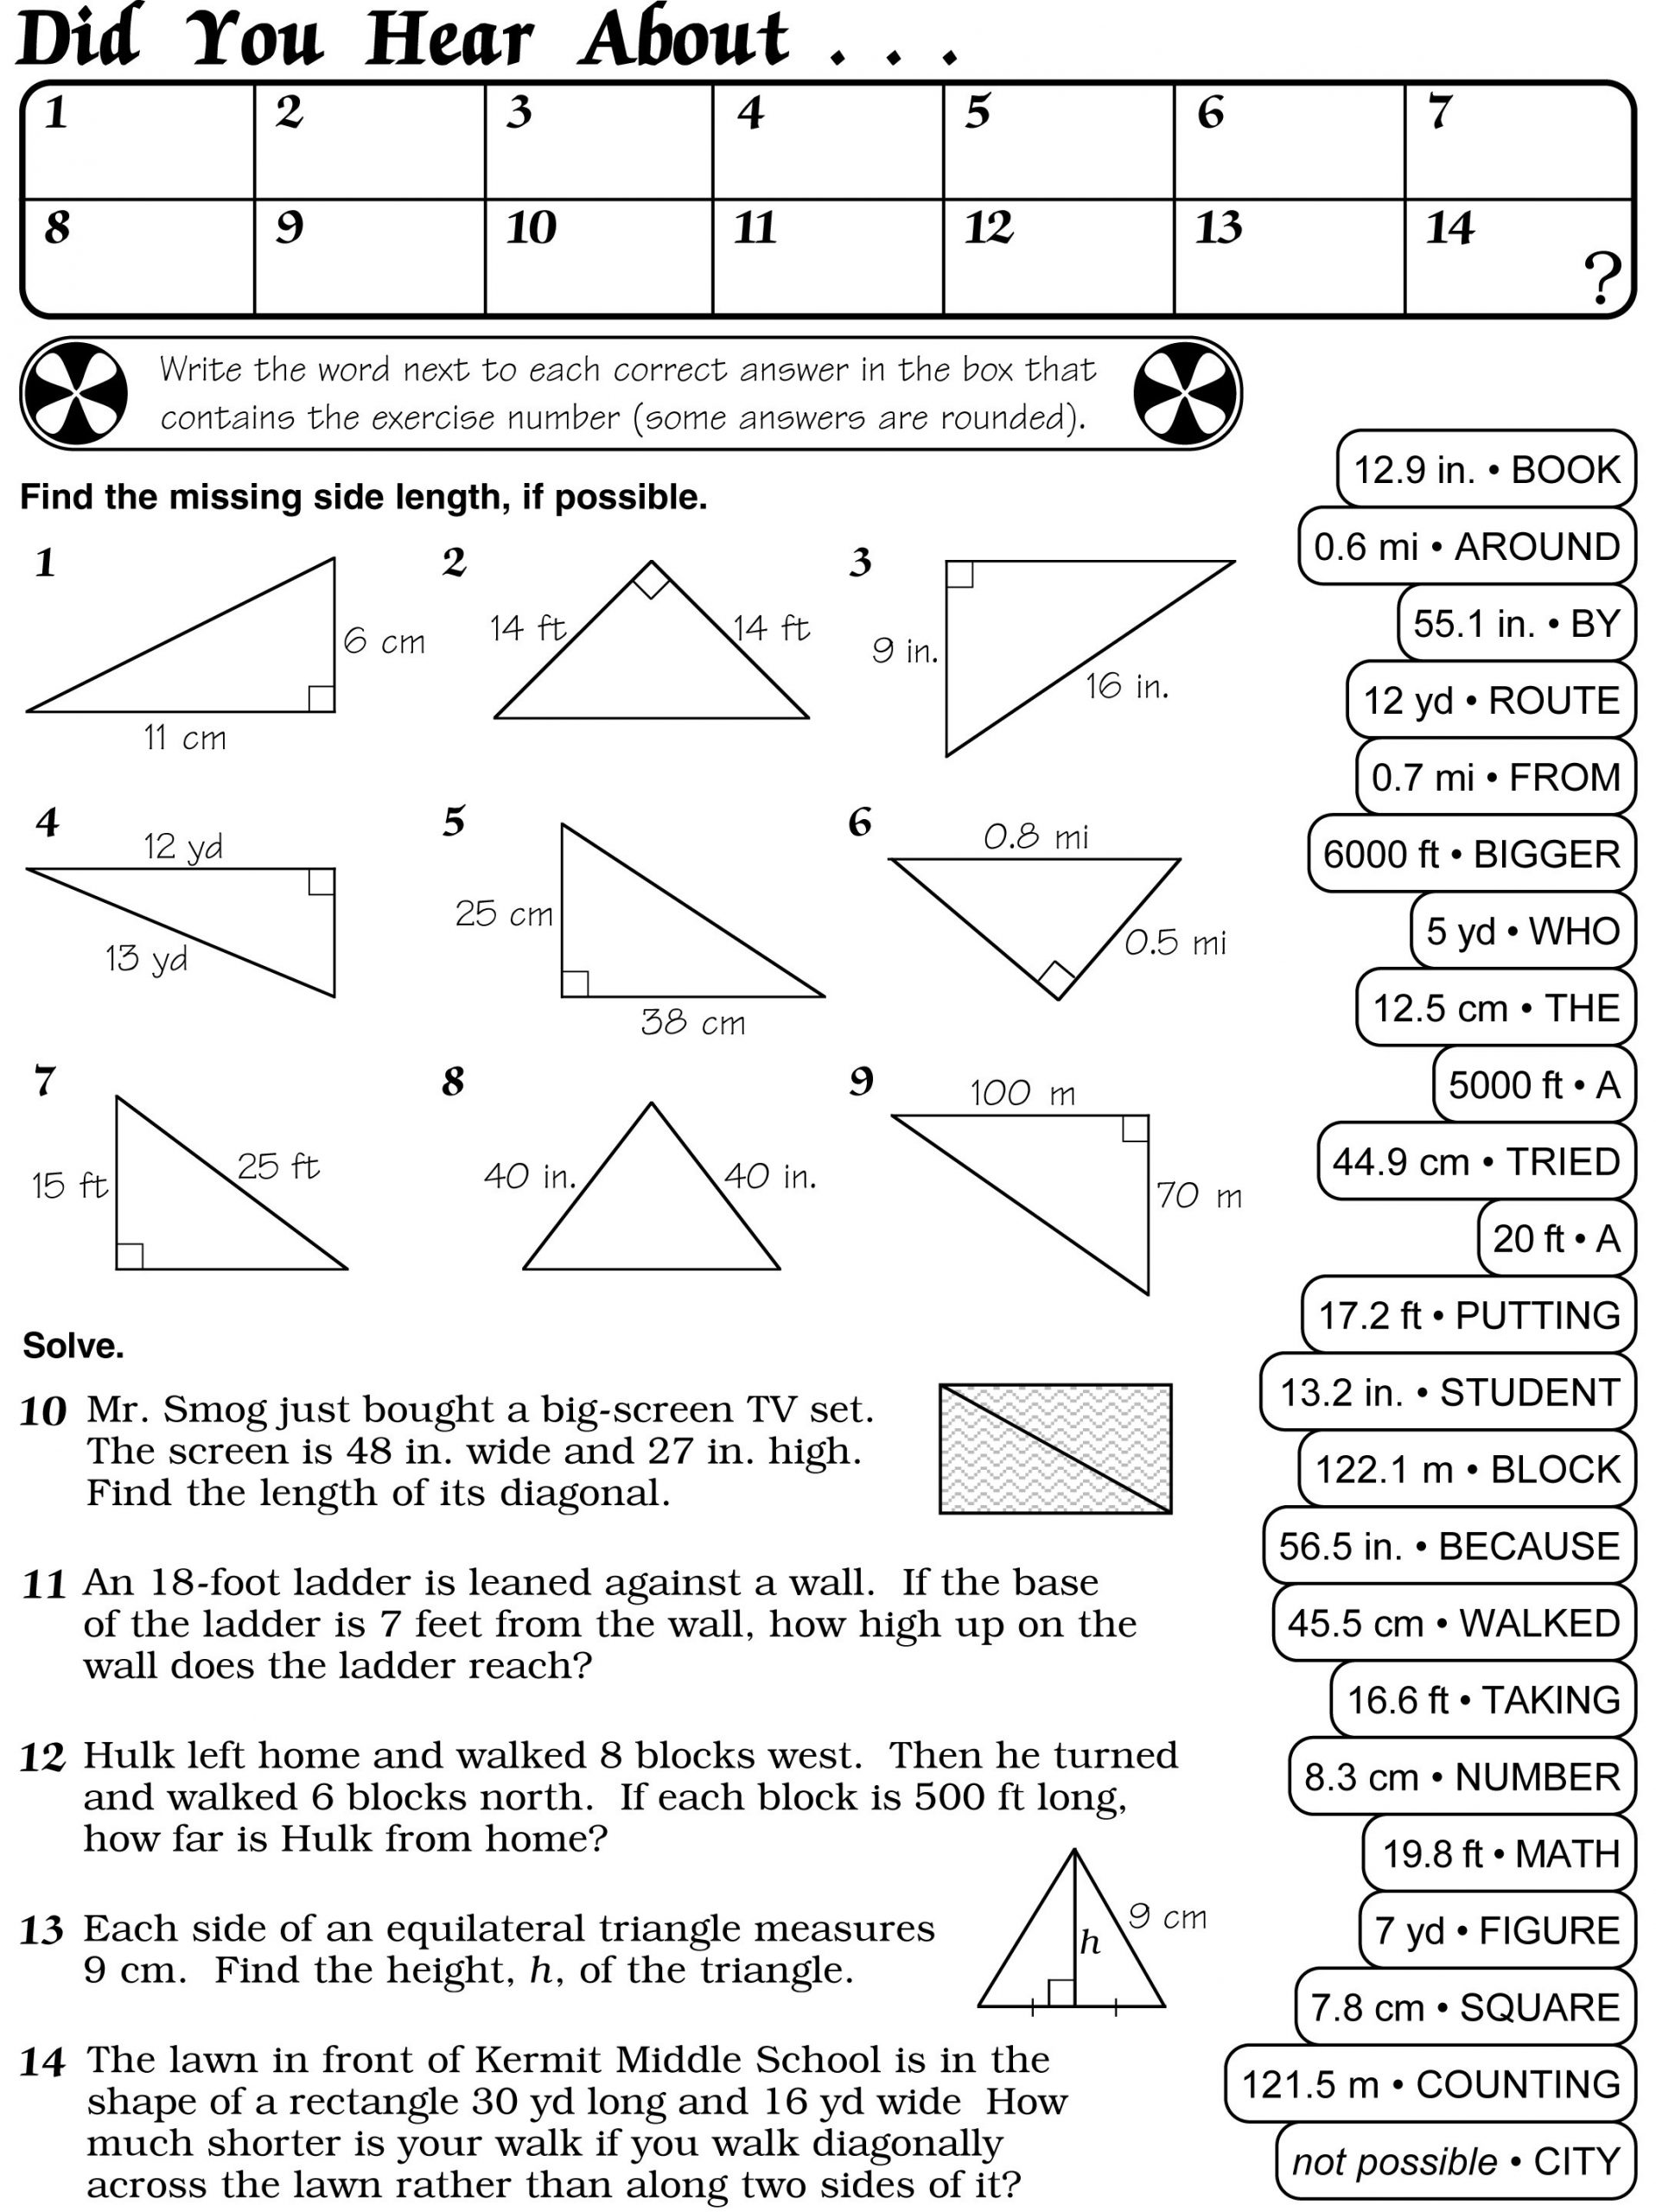 Pythagorean theorem Worksheet with Answers Untitled Document